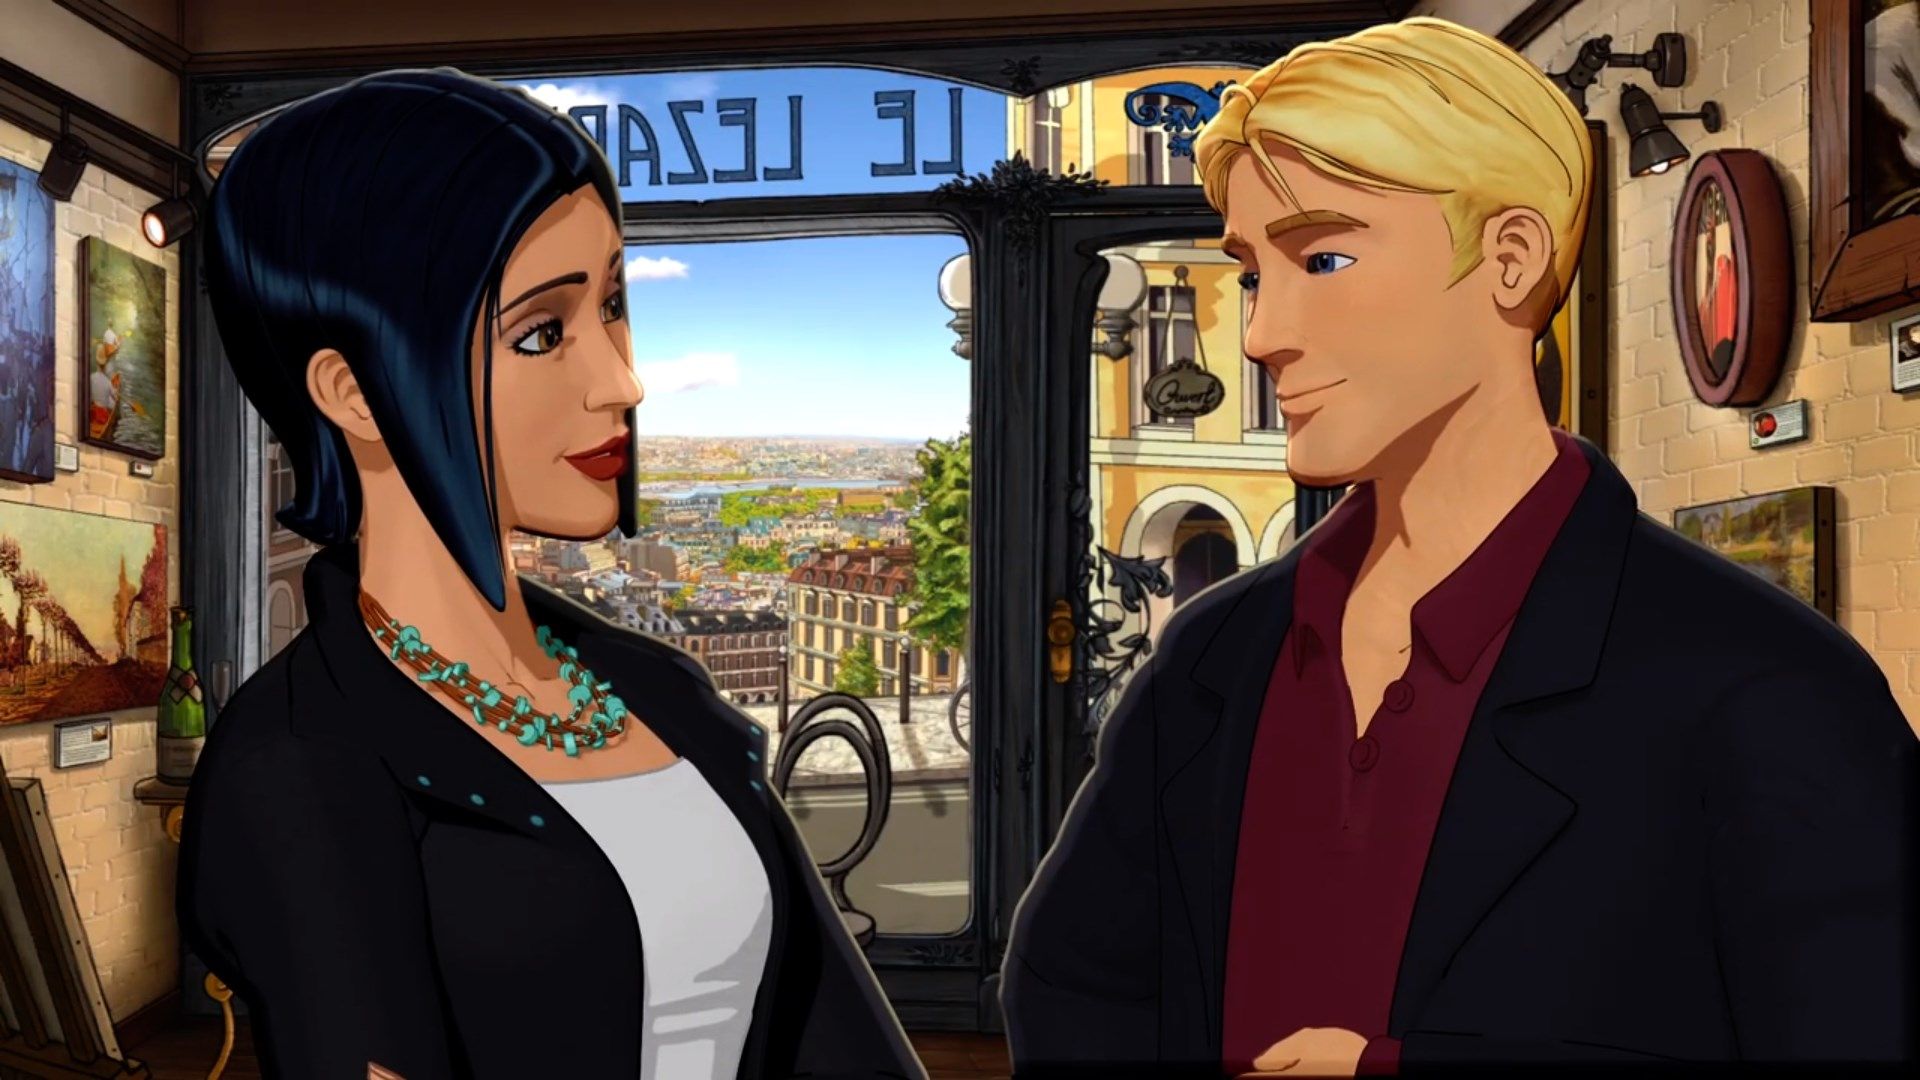 Image for Xbox Games with Gold February - Broken Sword 5: The Serpent's Curse, Hydrophobia, more